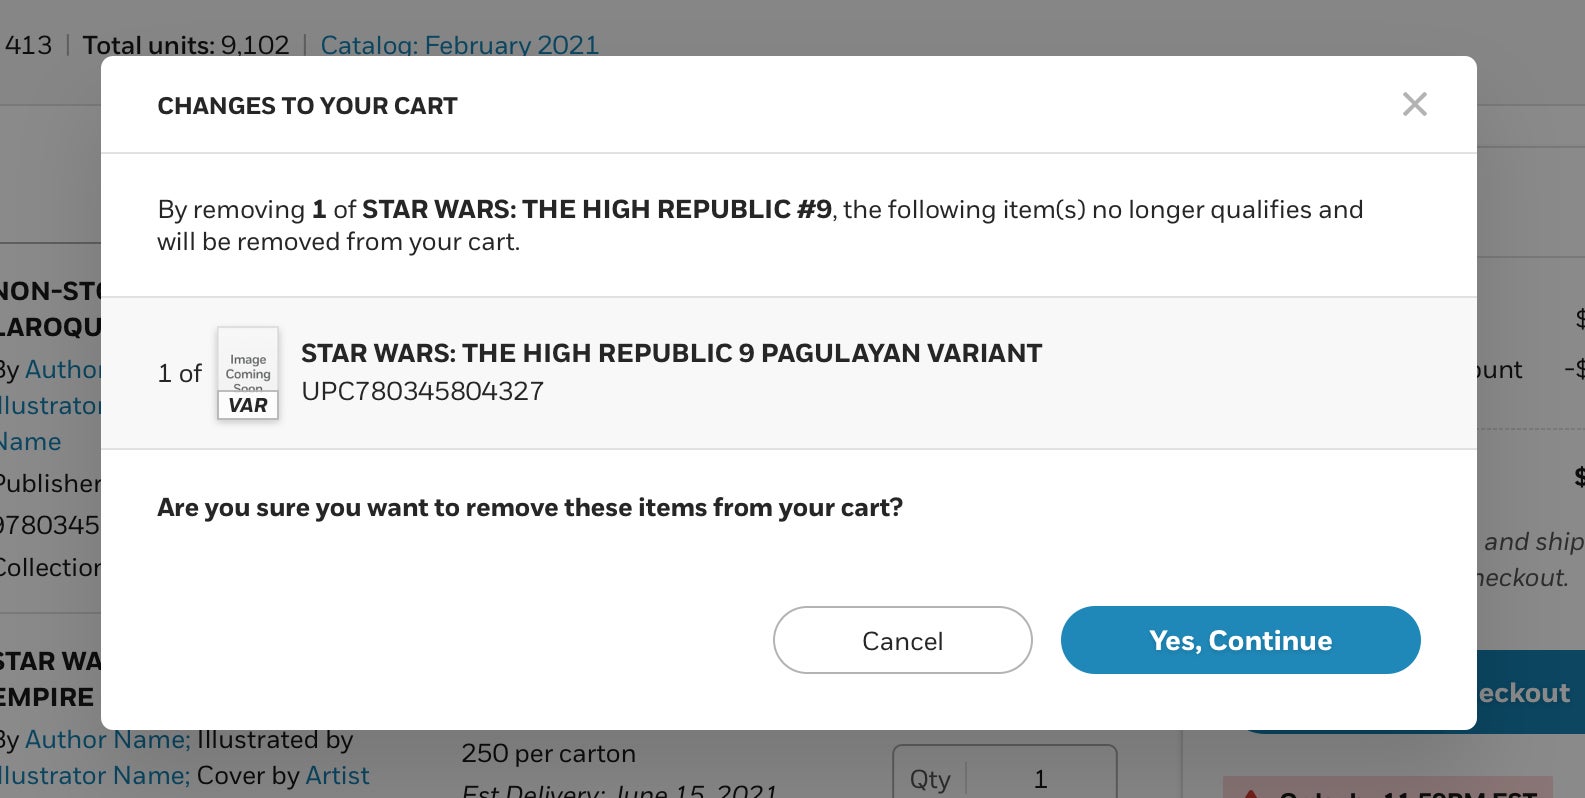 Warning modal user receives after removing items from their cart